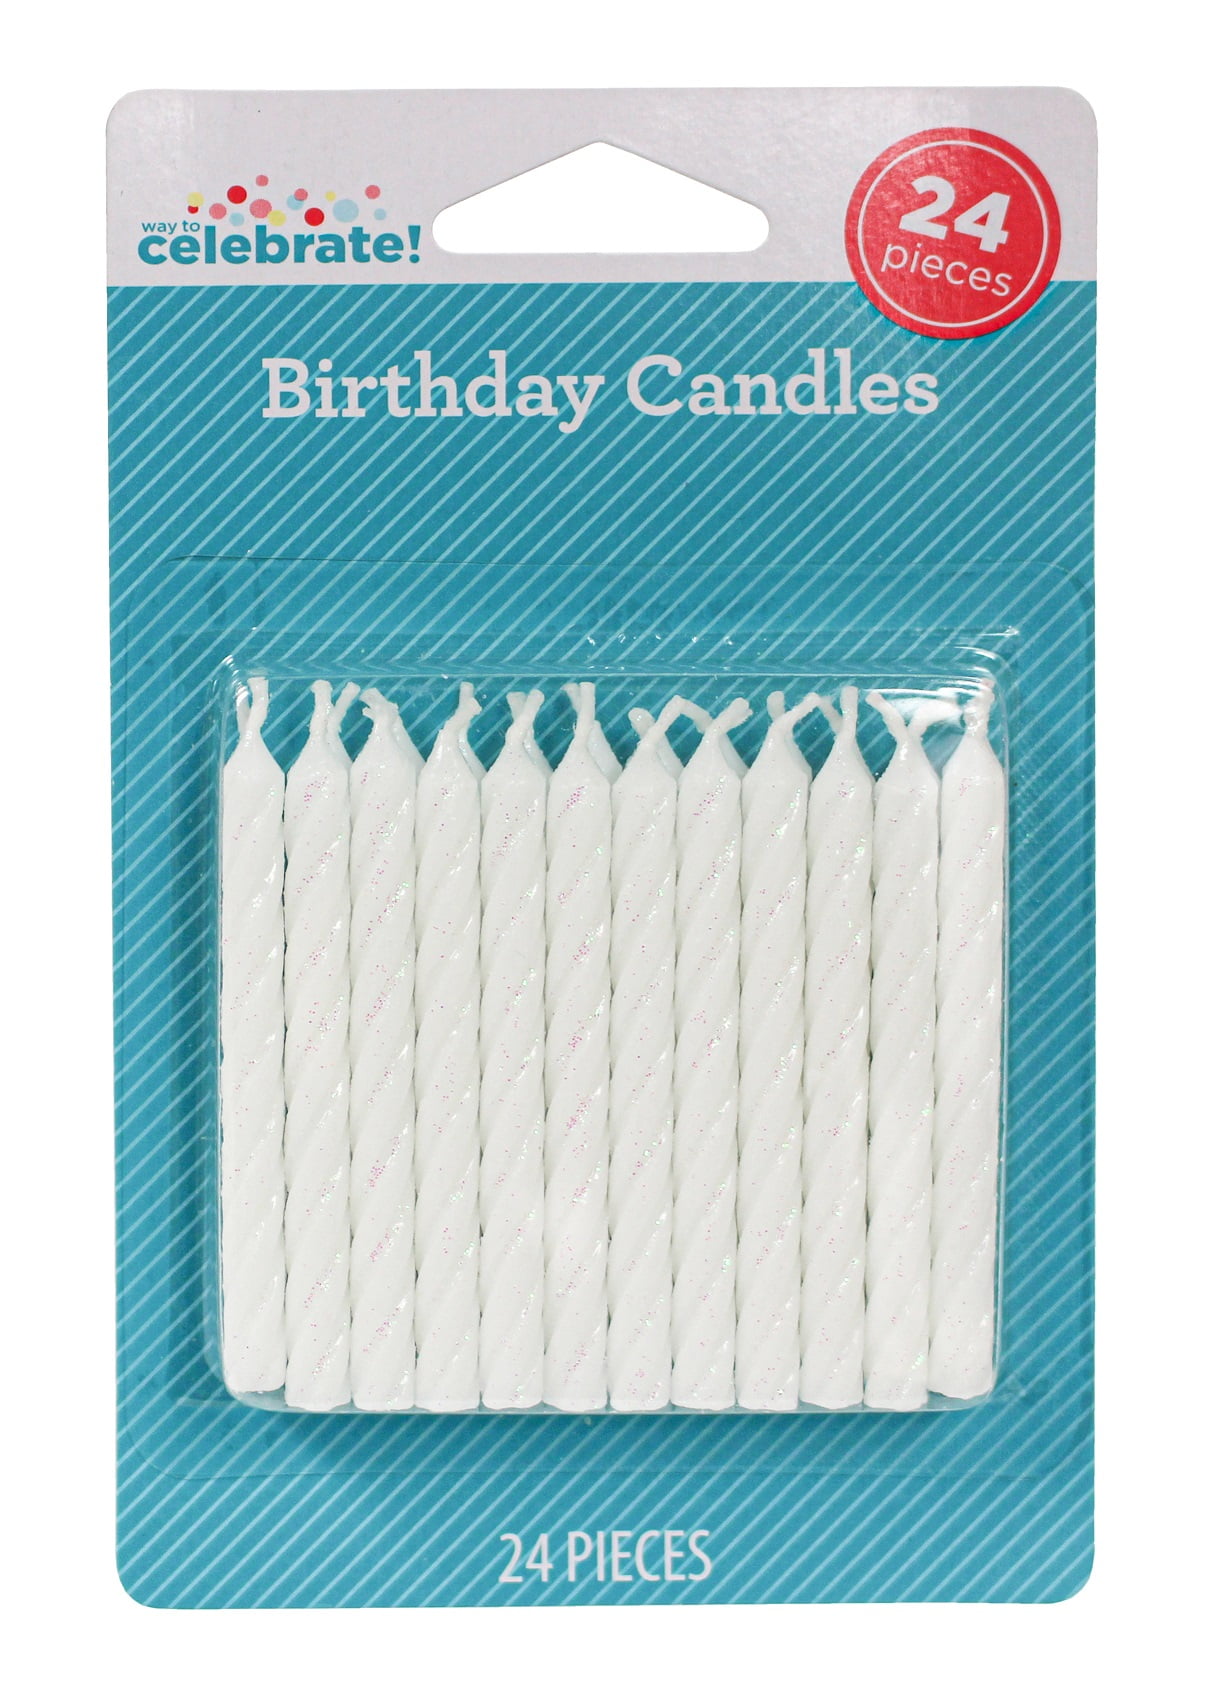 WAY TO CELEBRATE! Way To Celebrate Party Candle, White Spiral Birthday Candles, 24 Count